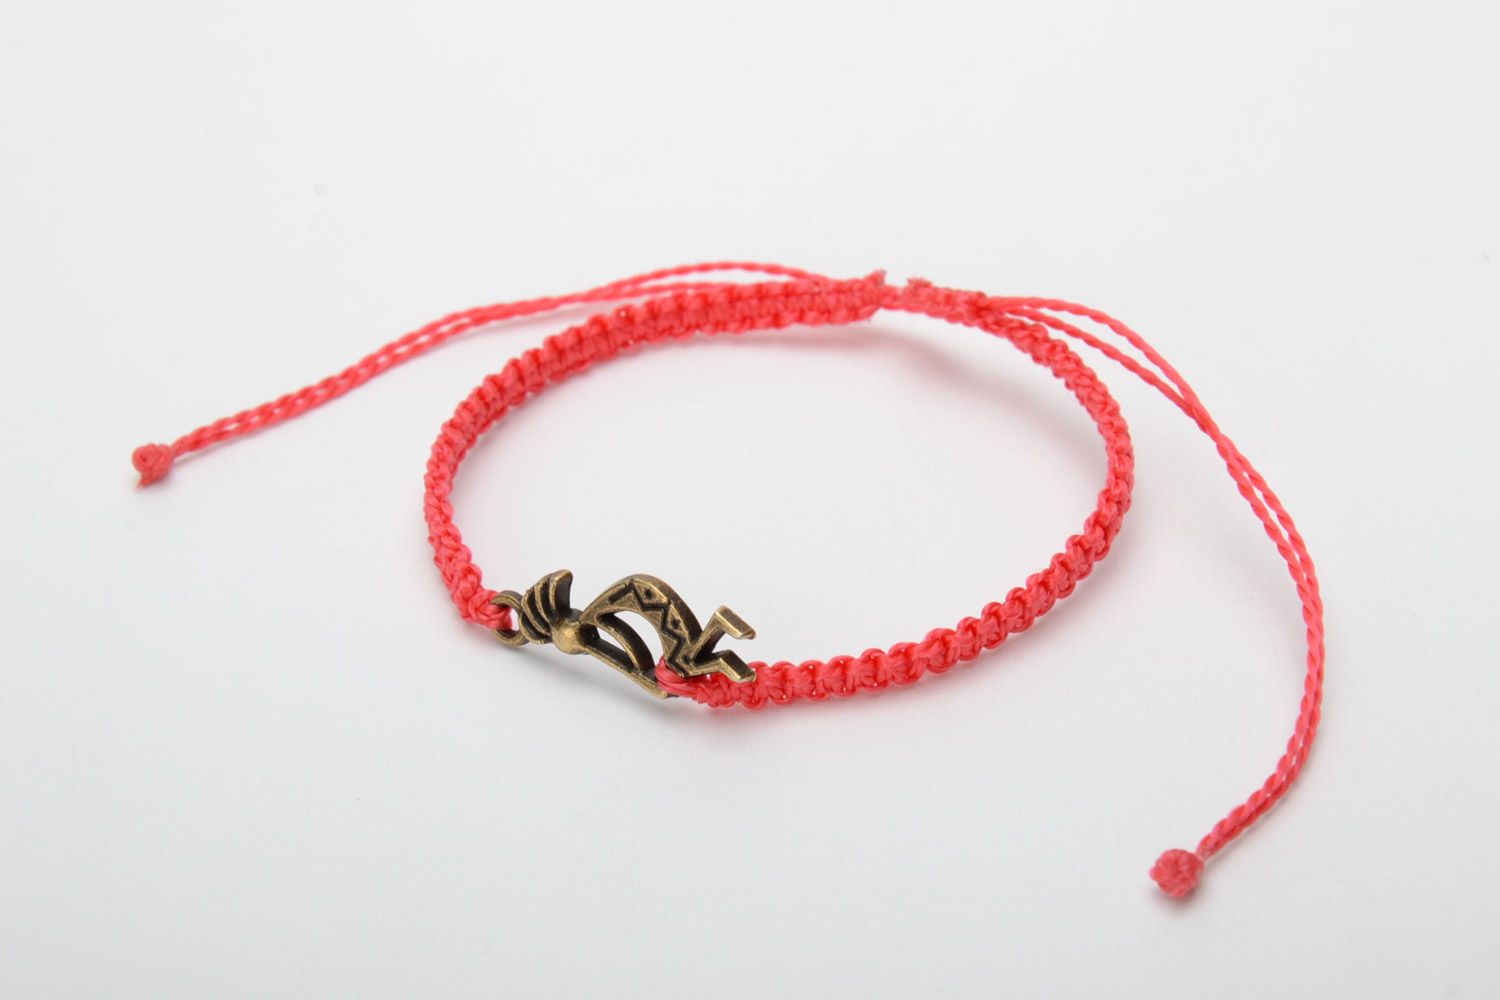 Handmade woven capron thread wrist bracelet of red color with charm photo 3